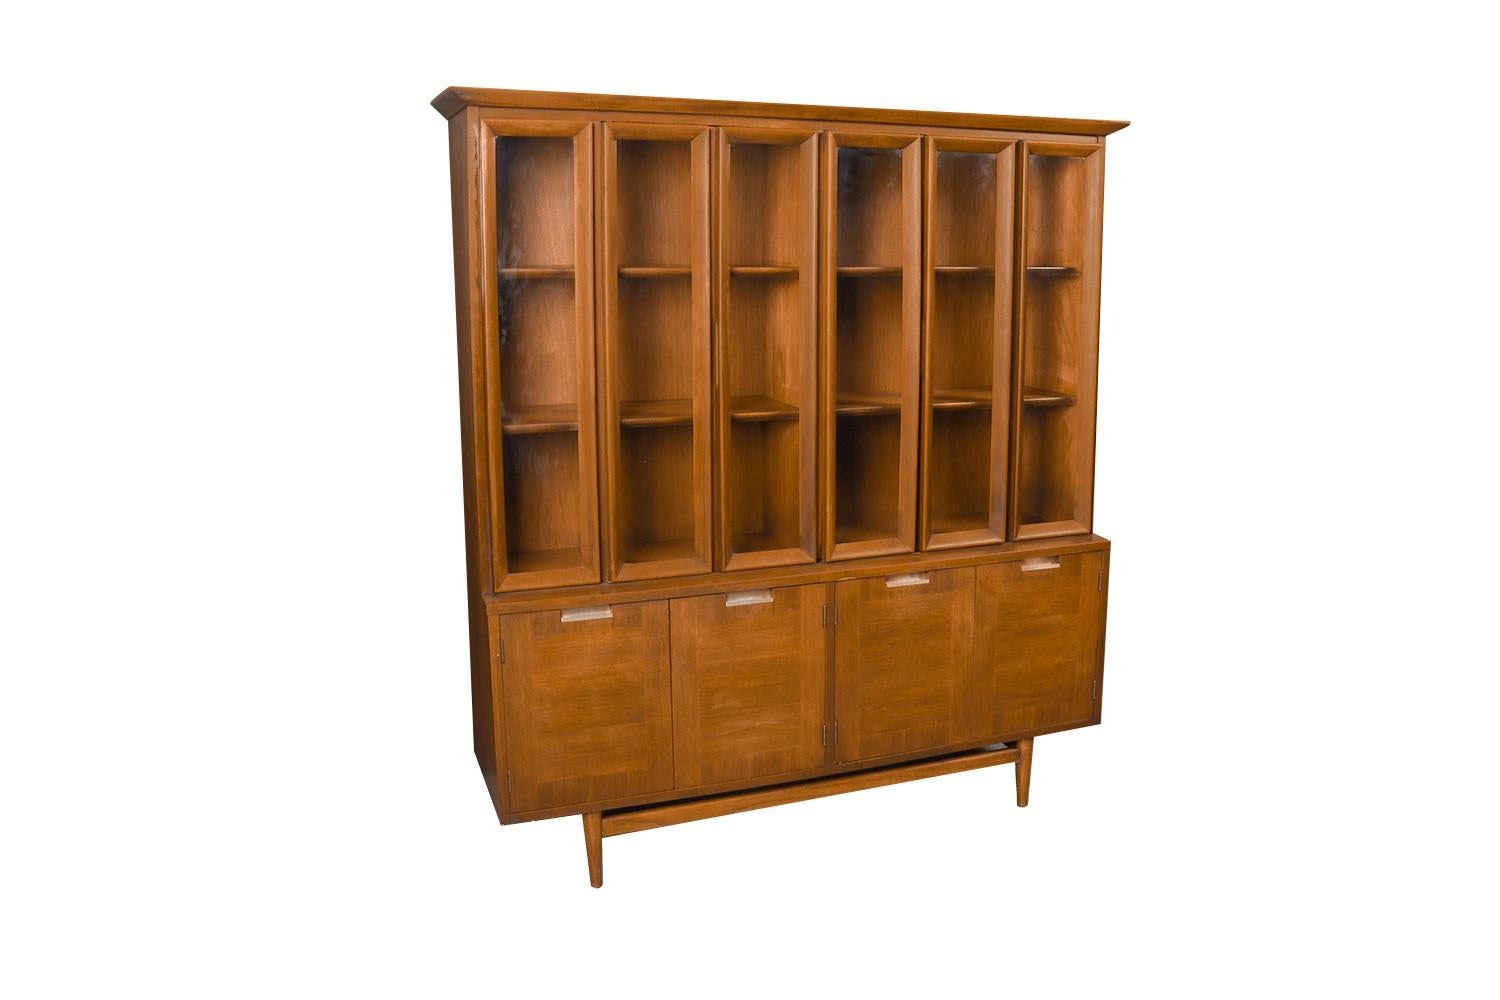 Beautiful, rare, retro Mid-Century Modern detailed proportioned walnut American of Martinsville China cabinet hutch in great original condition. The hutch is one solid-piece, featuring two pairs of stunning bifold glass cabinet paned doors, accented